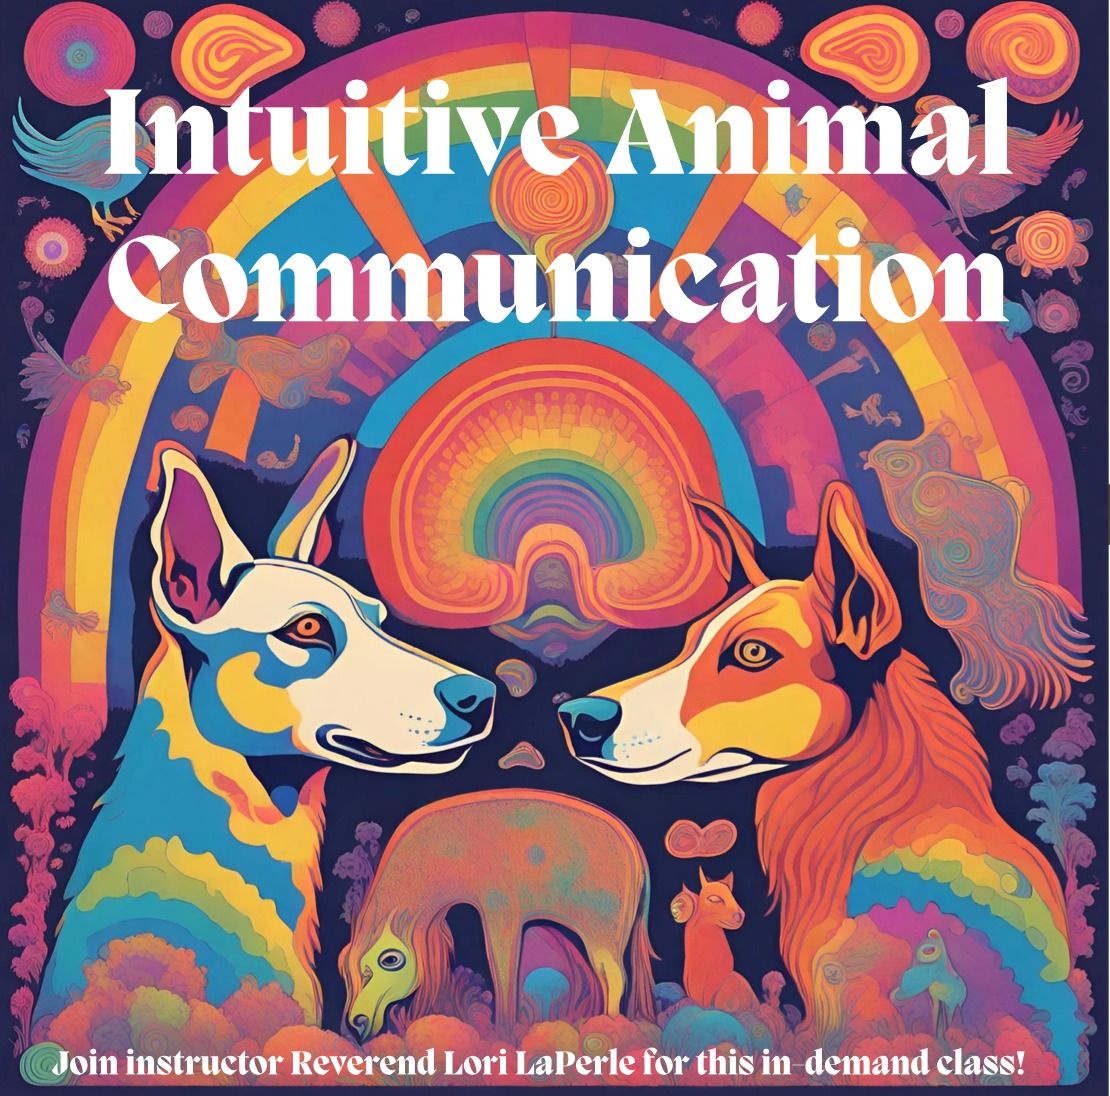 Introduction to Intuitive Animal Communication